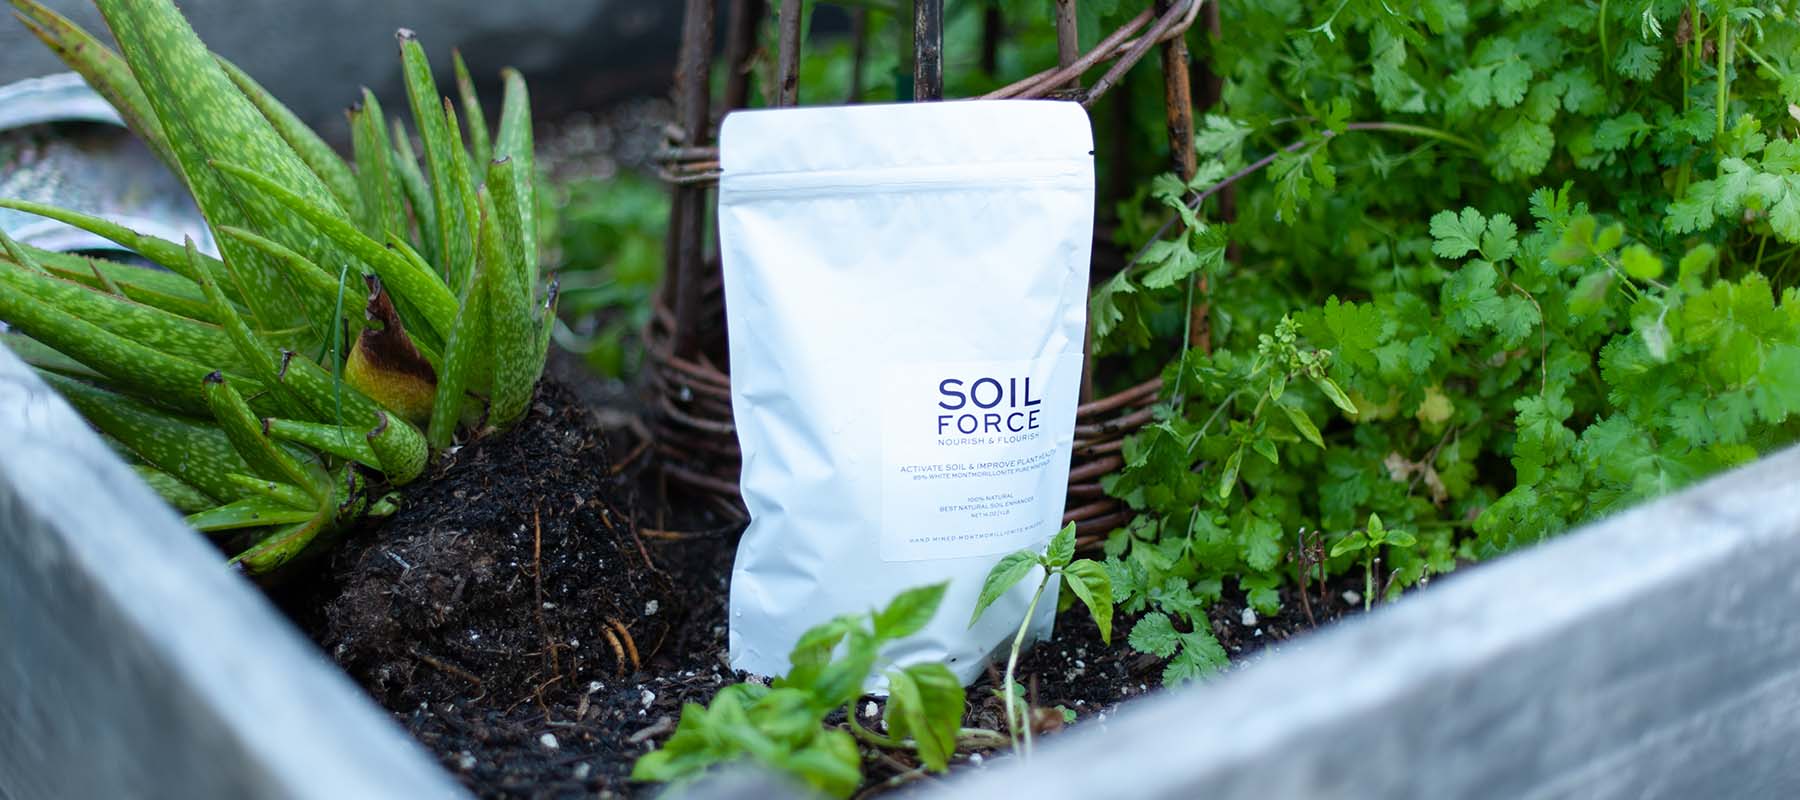 What is Soil Force?